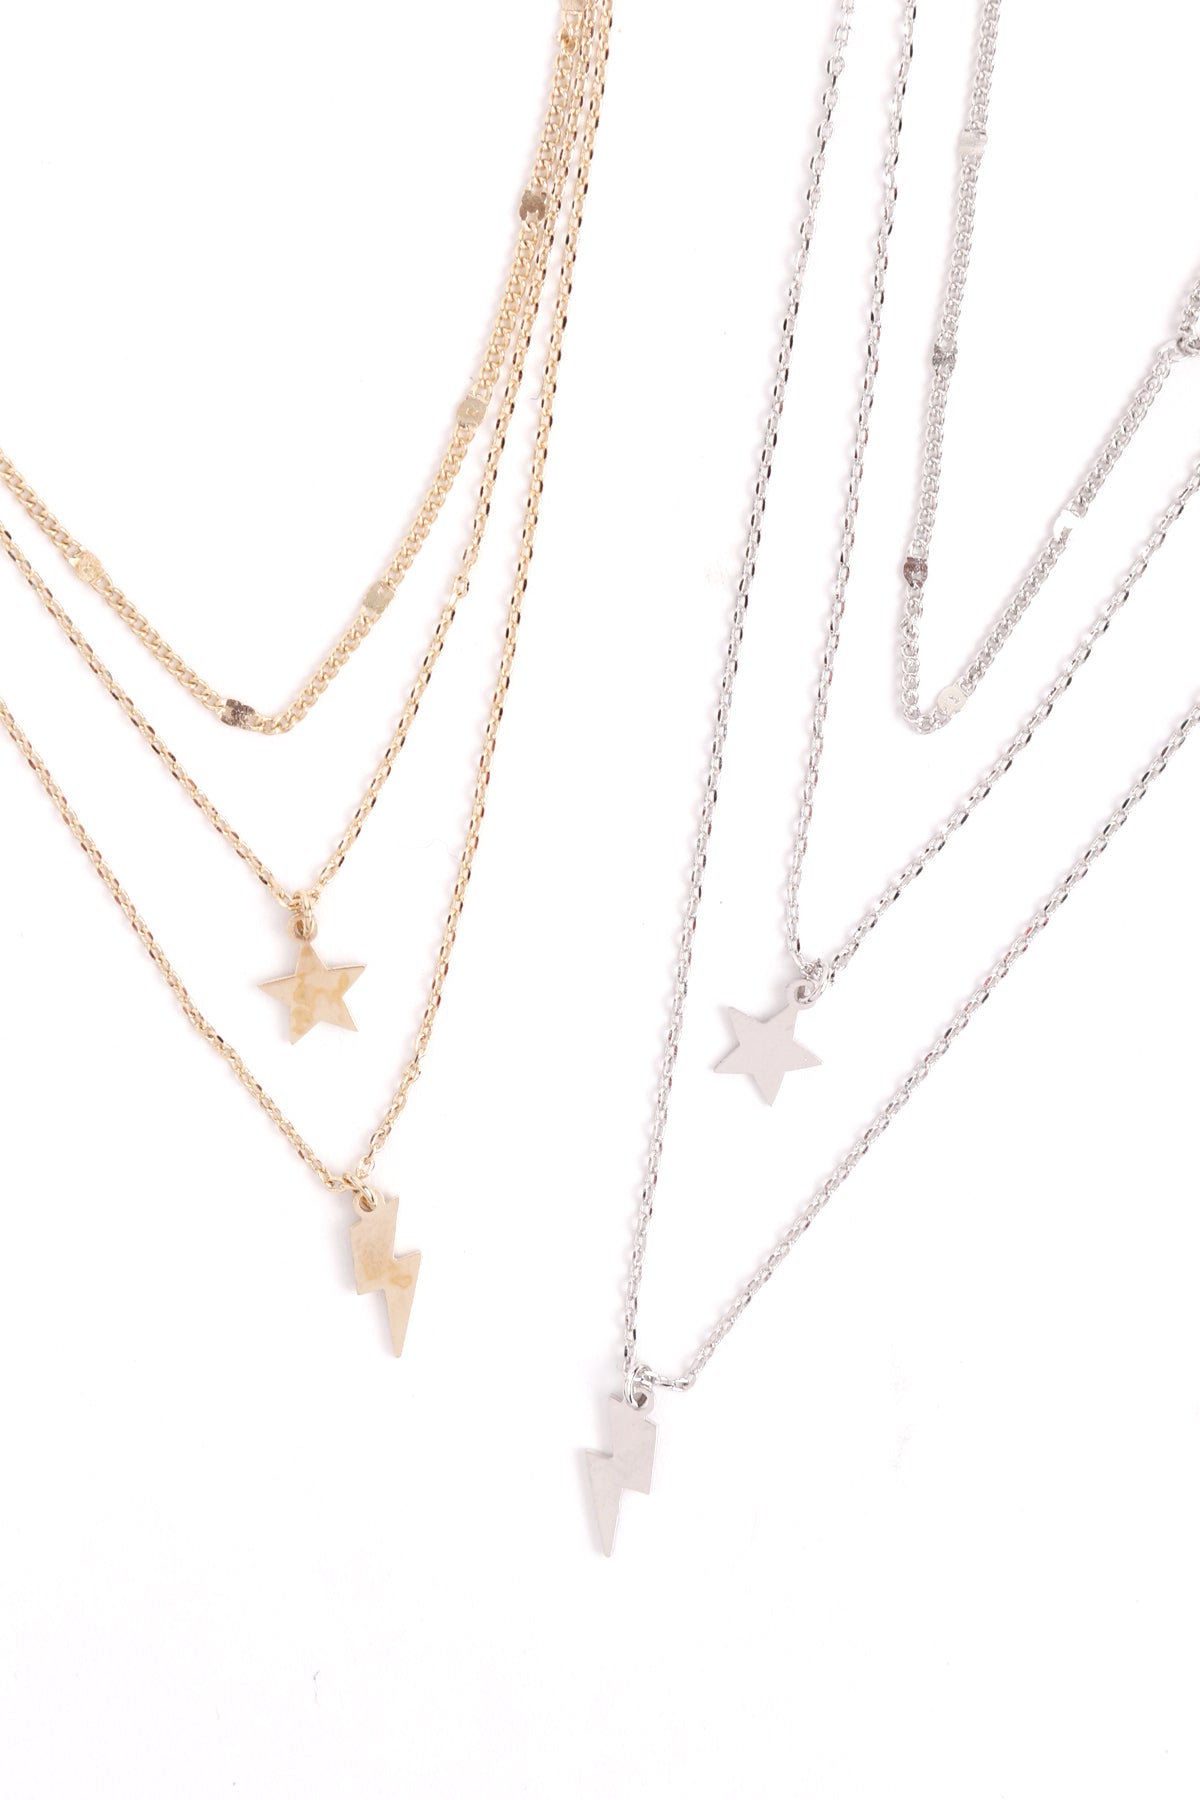 3 LAYERED STAR AND LIGHNING NECKLACE